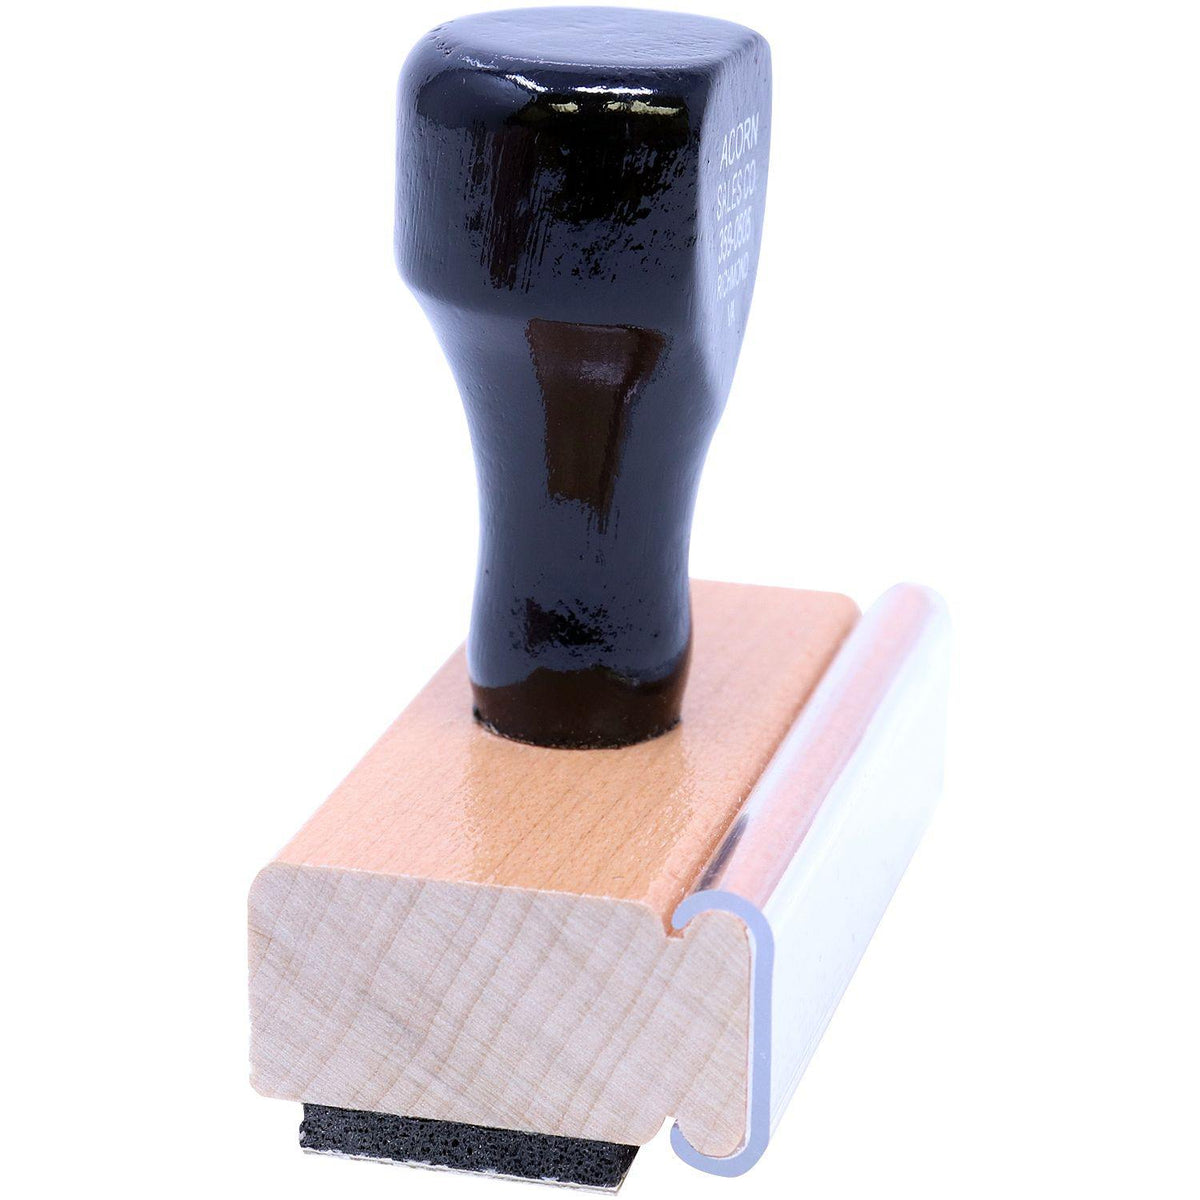 Side View of Important Rubber Stamp at an Angle